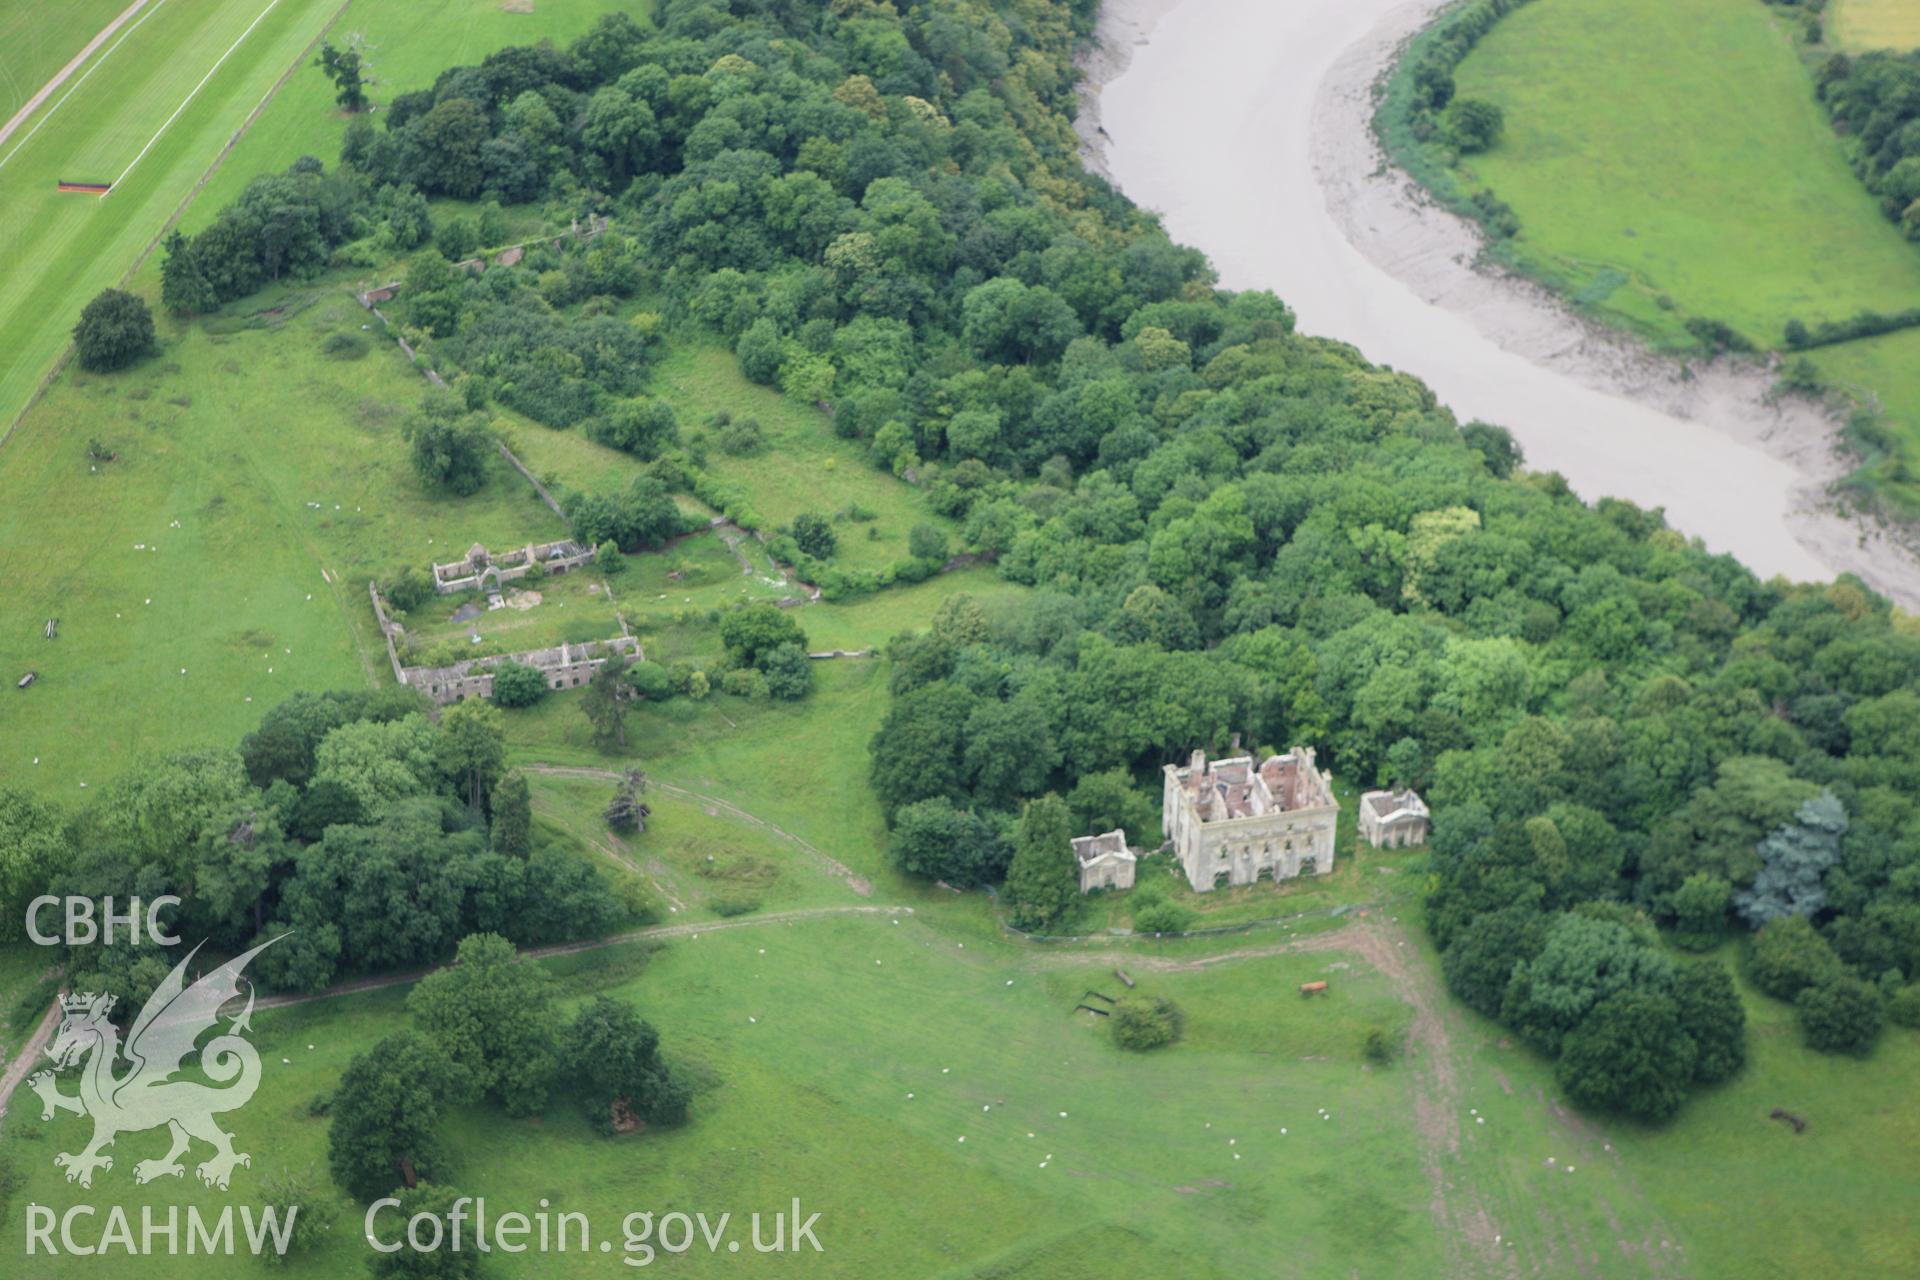 RCAHMW colour oblique aerial photograph of the ruins of Piercefield. Taken on 09 July 2009 by Toby Driver